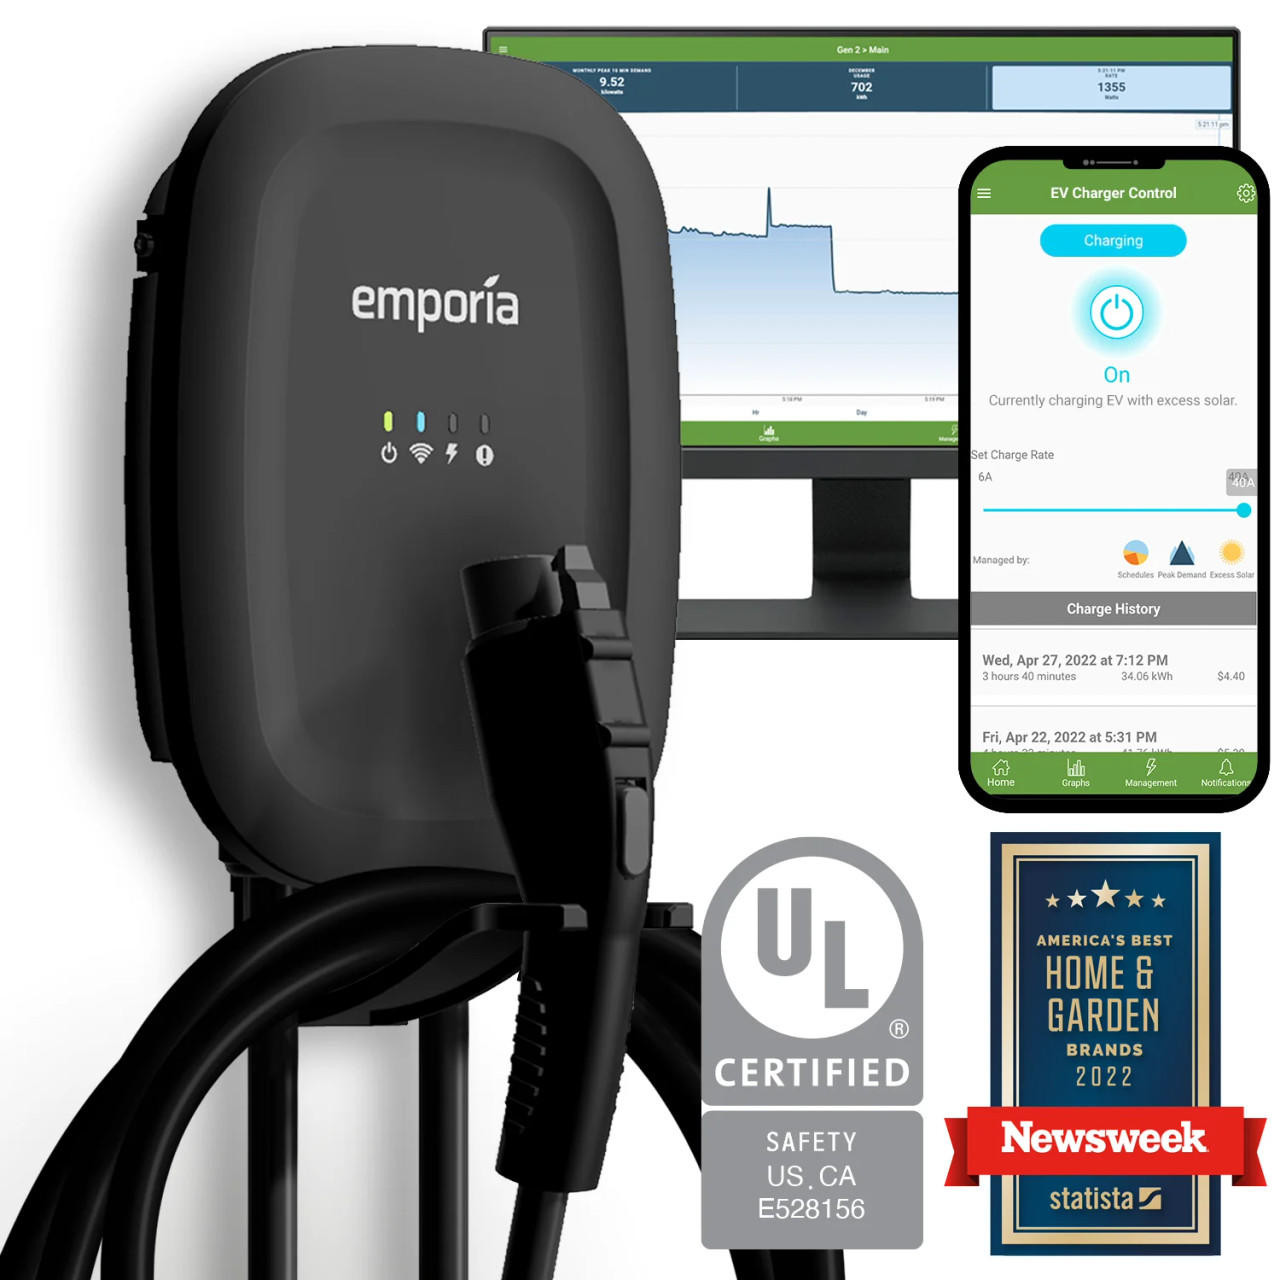 What is the level 2 best home electric car charger?